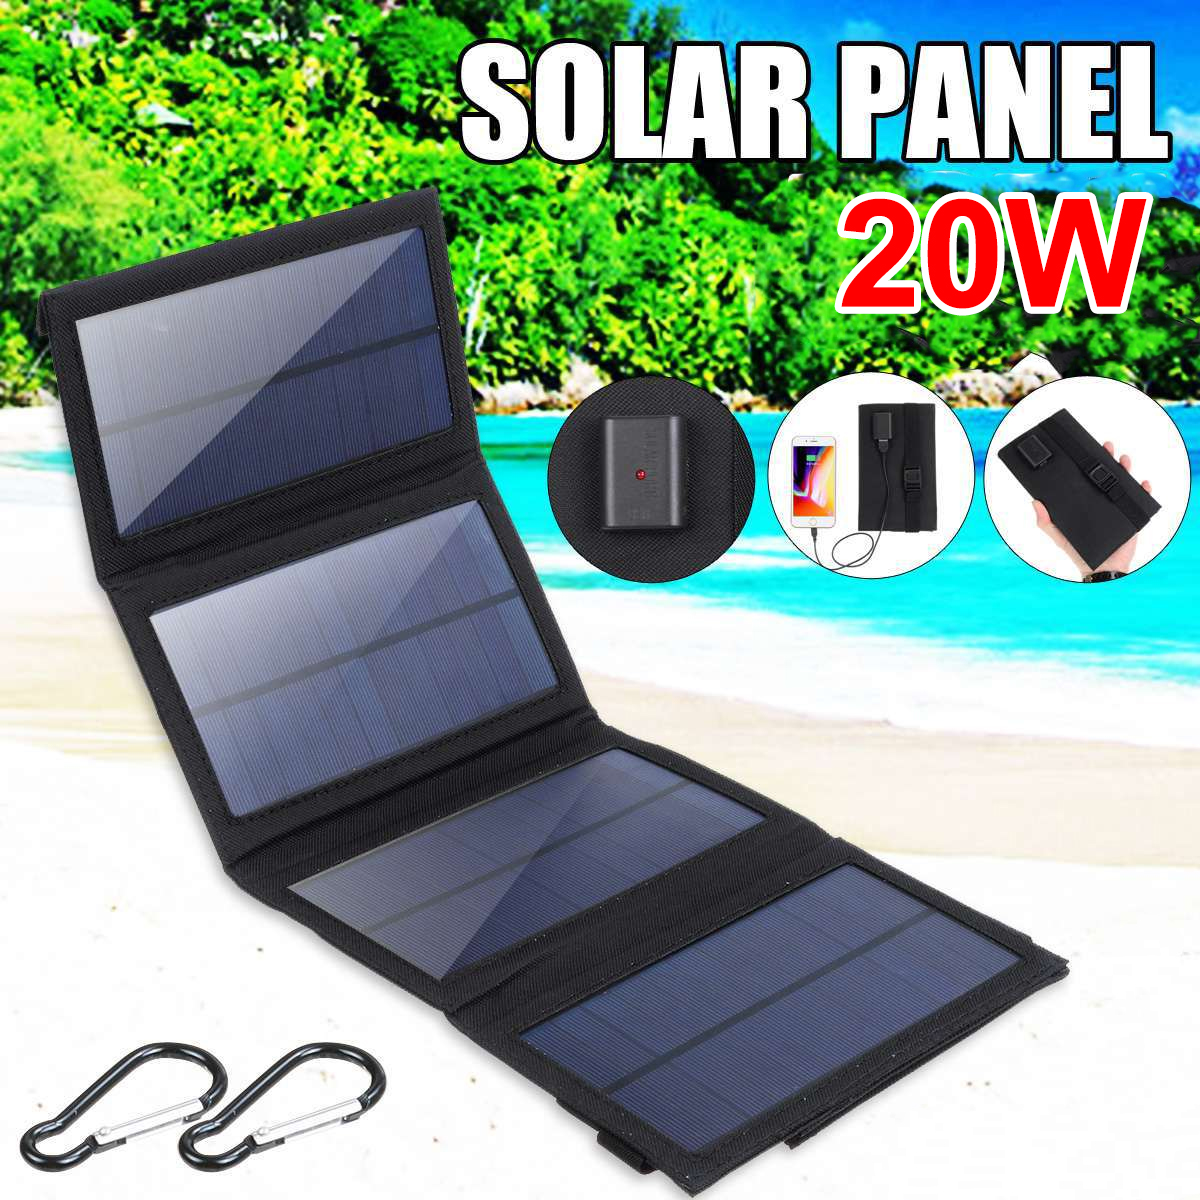 20W-USB-Solar-Panel-Folding-Power-Bank-Outdoor-Camping-Hiking-Phone-Charger-1925216-1